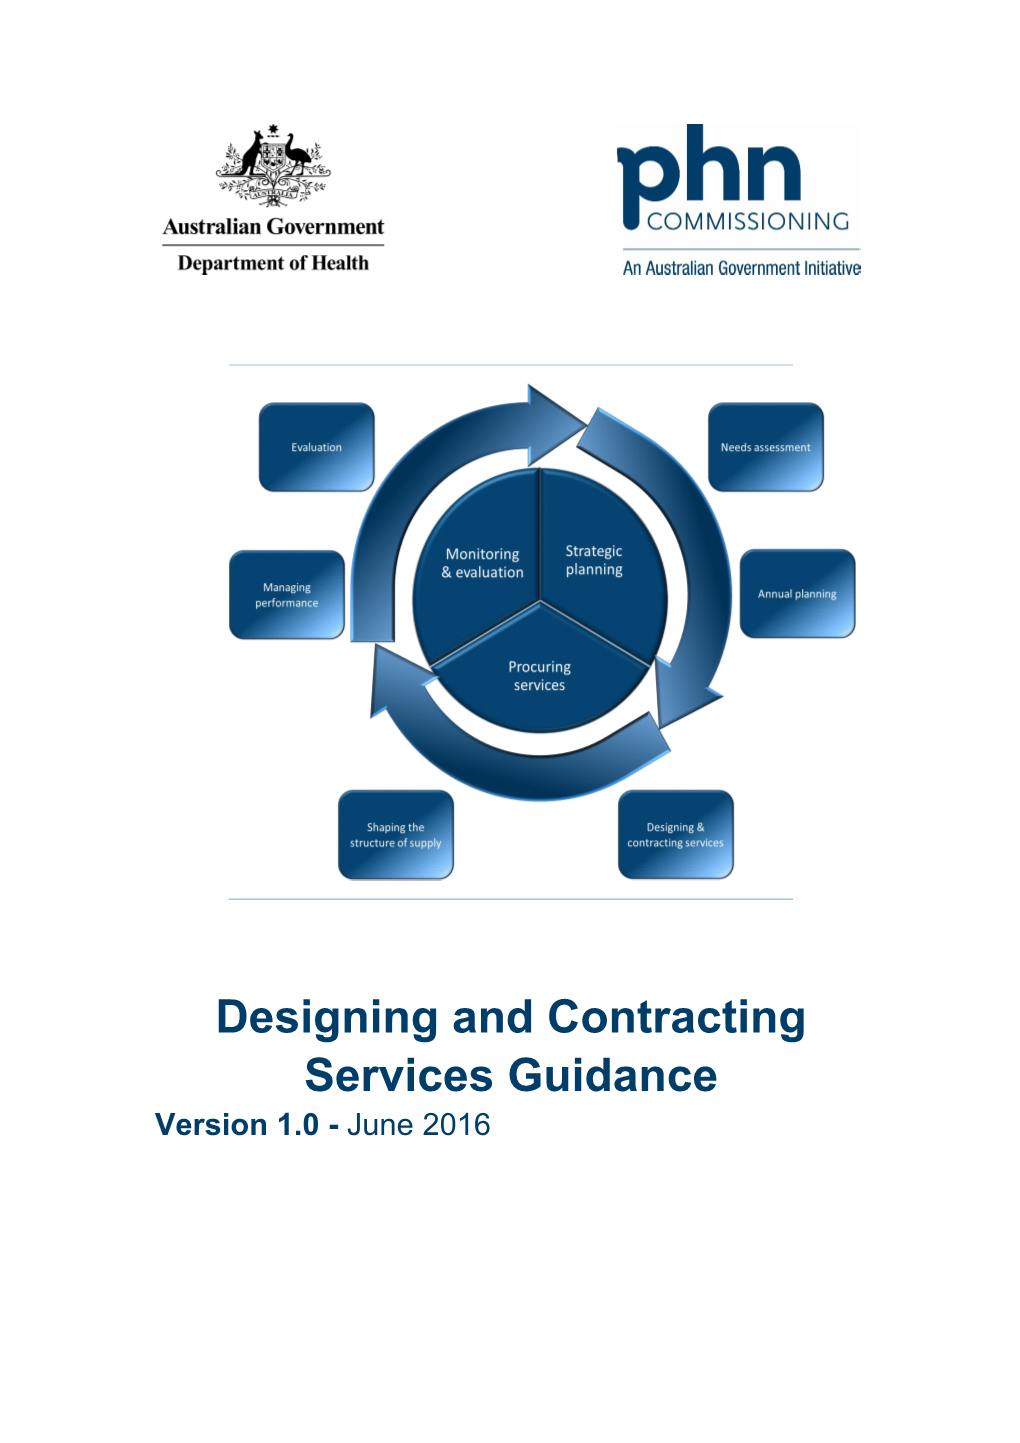 Designing and Contracting Services Guidance